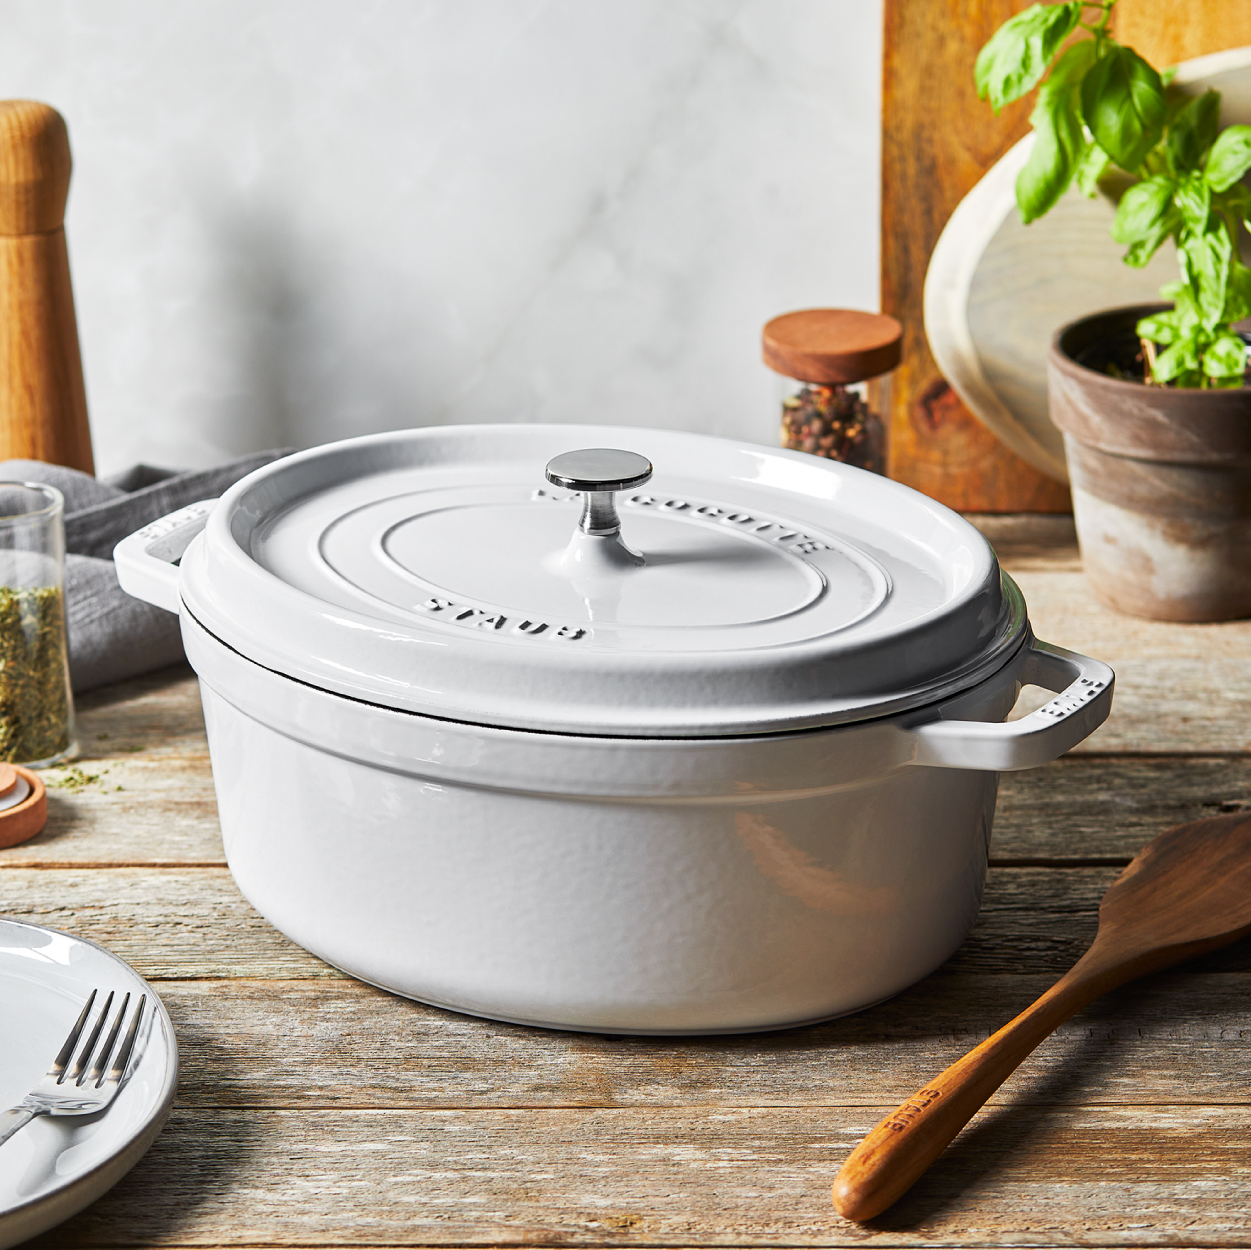 https://www.zwilling.com/on/demandware.static/-/Sites-zwilling-us-Library/default/dw681e63c0/images/product-content/masonry-content/staub/cast-iron/cocotte/OvalCocottes_Mason_Comp_600-600_OvalCocotte_3.jpg